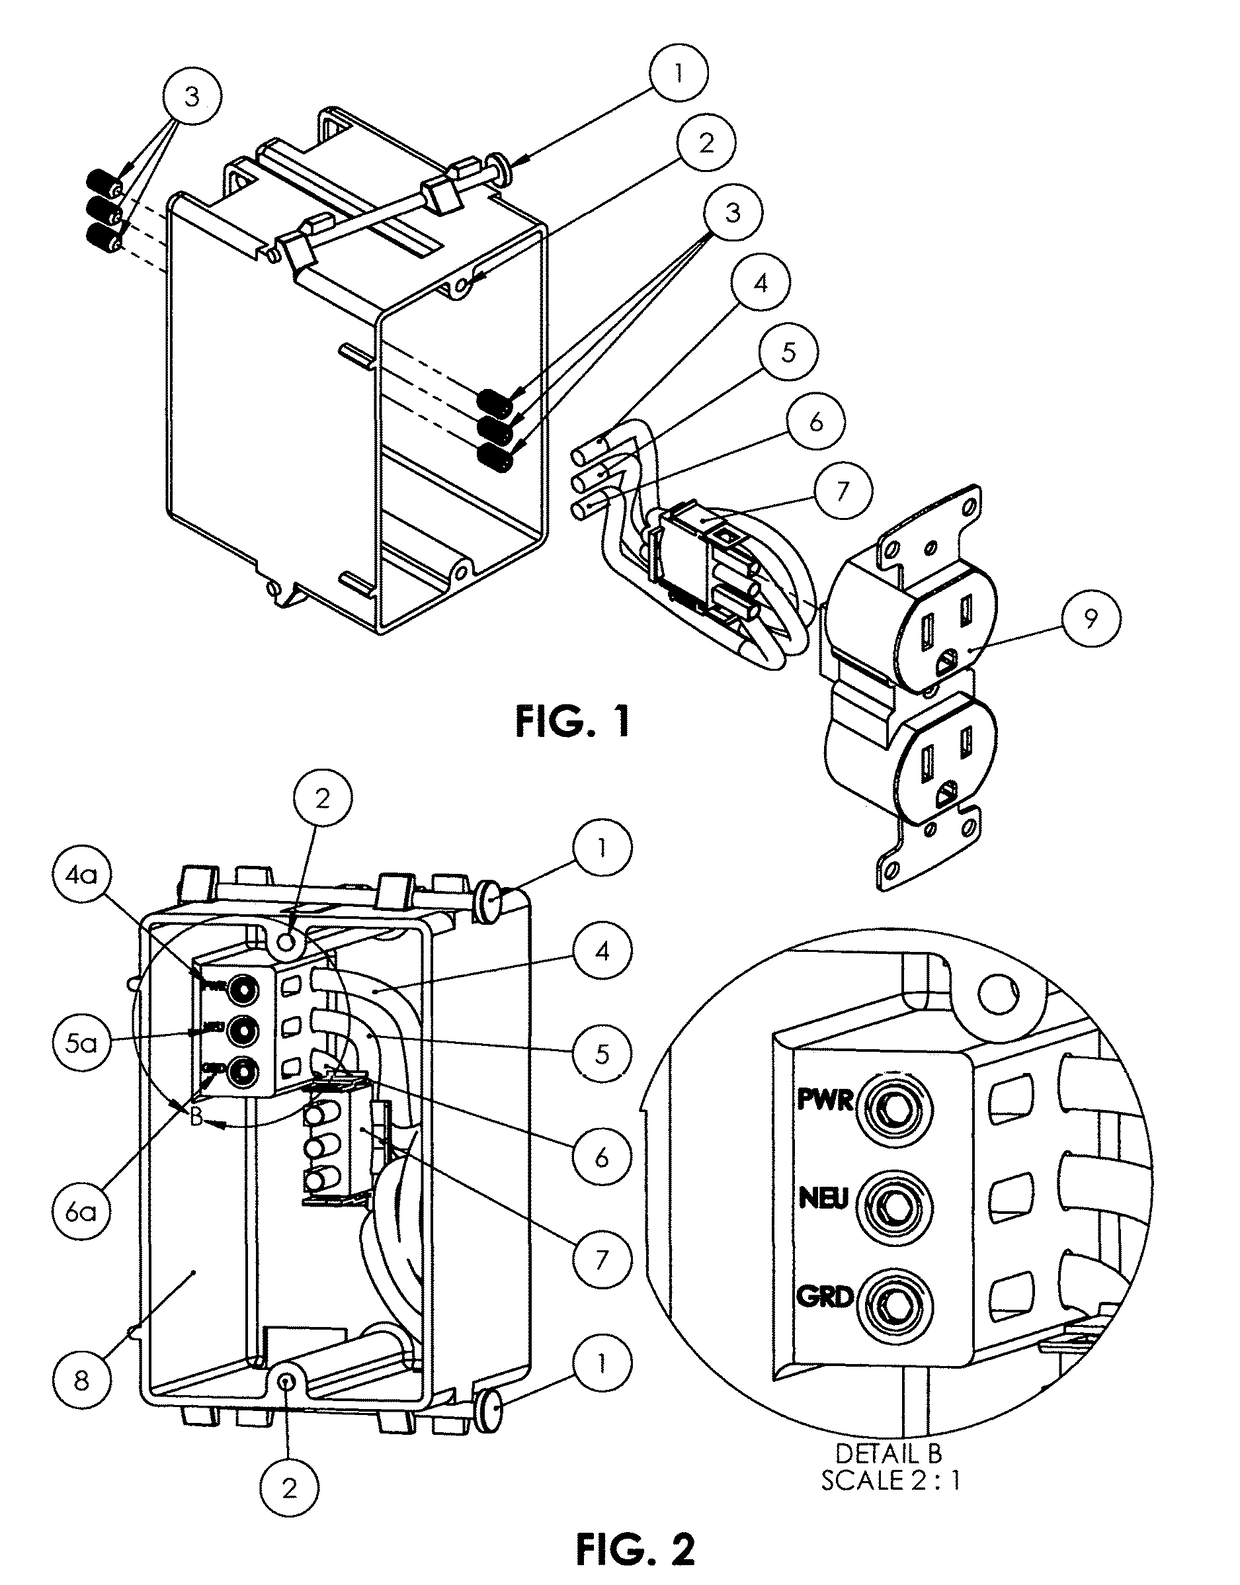 Electrical box, electrical switch and electrical plug-in mechanism